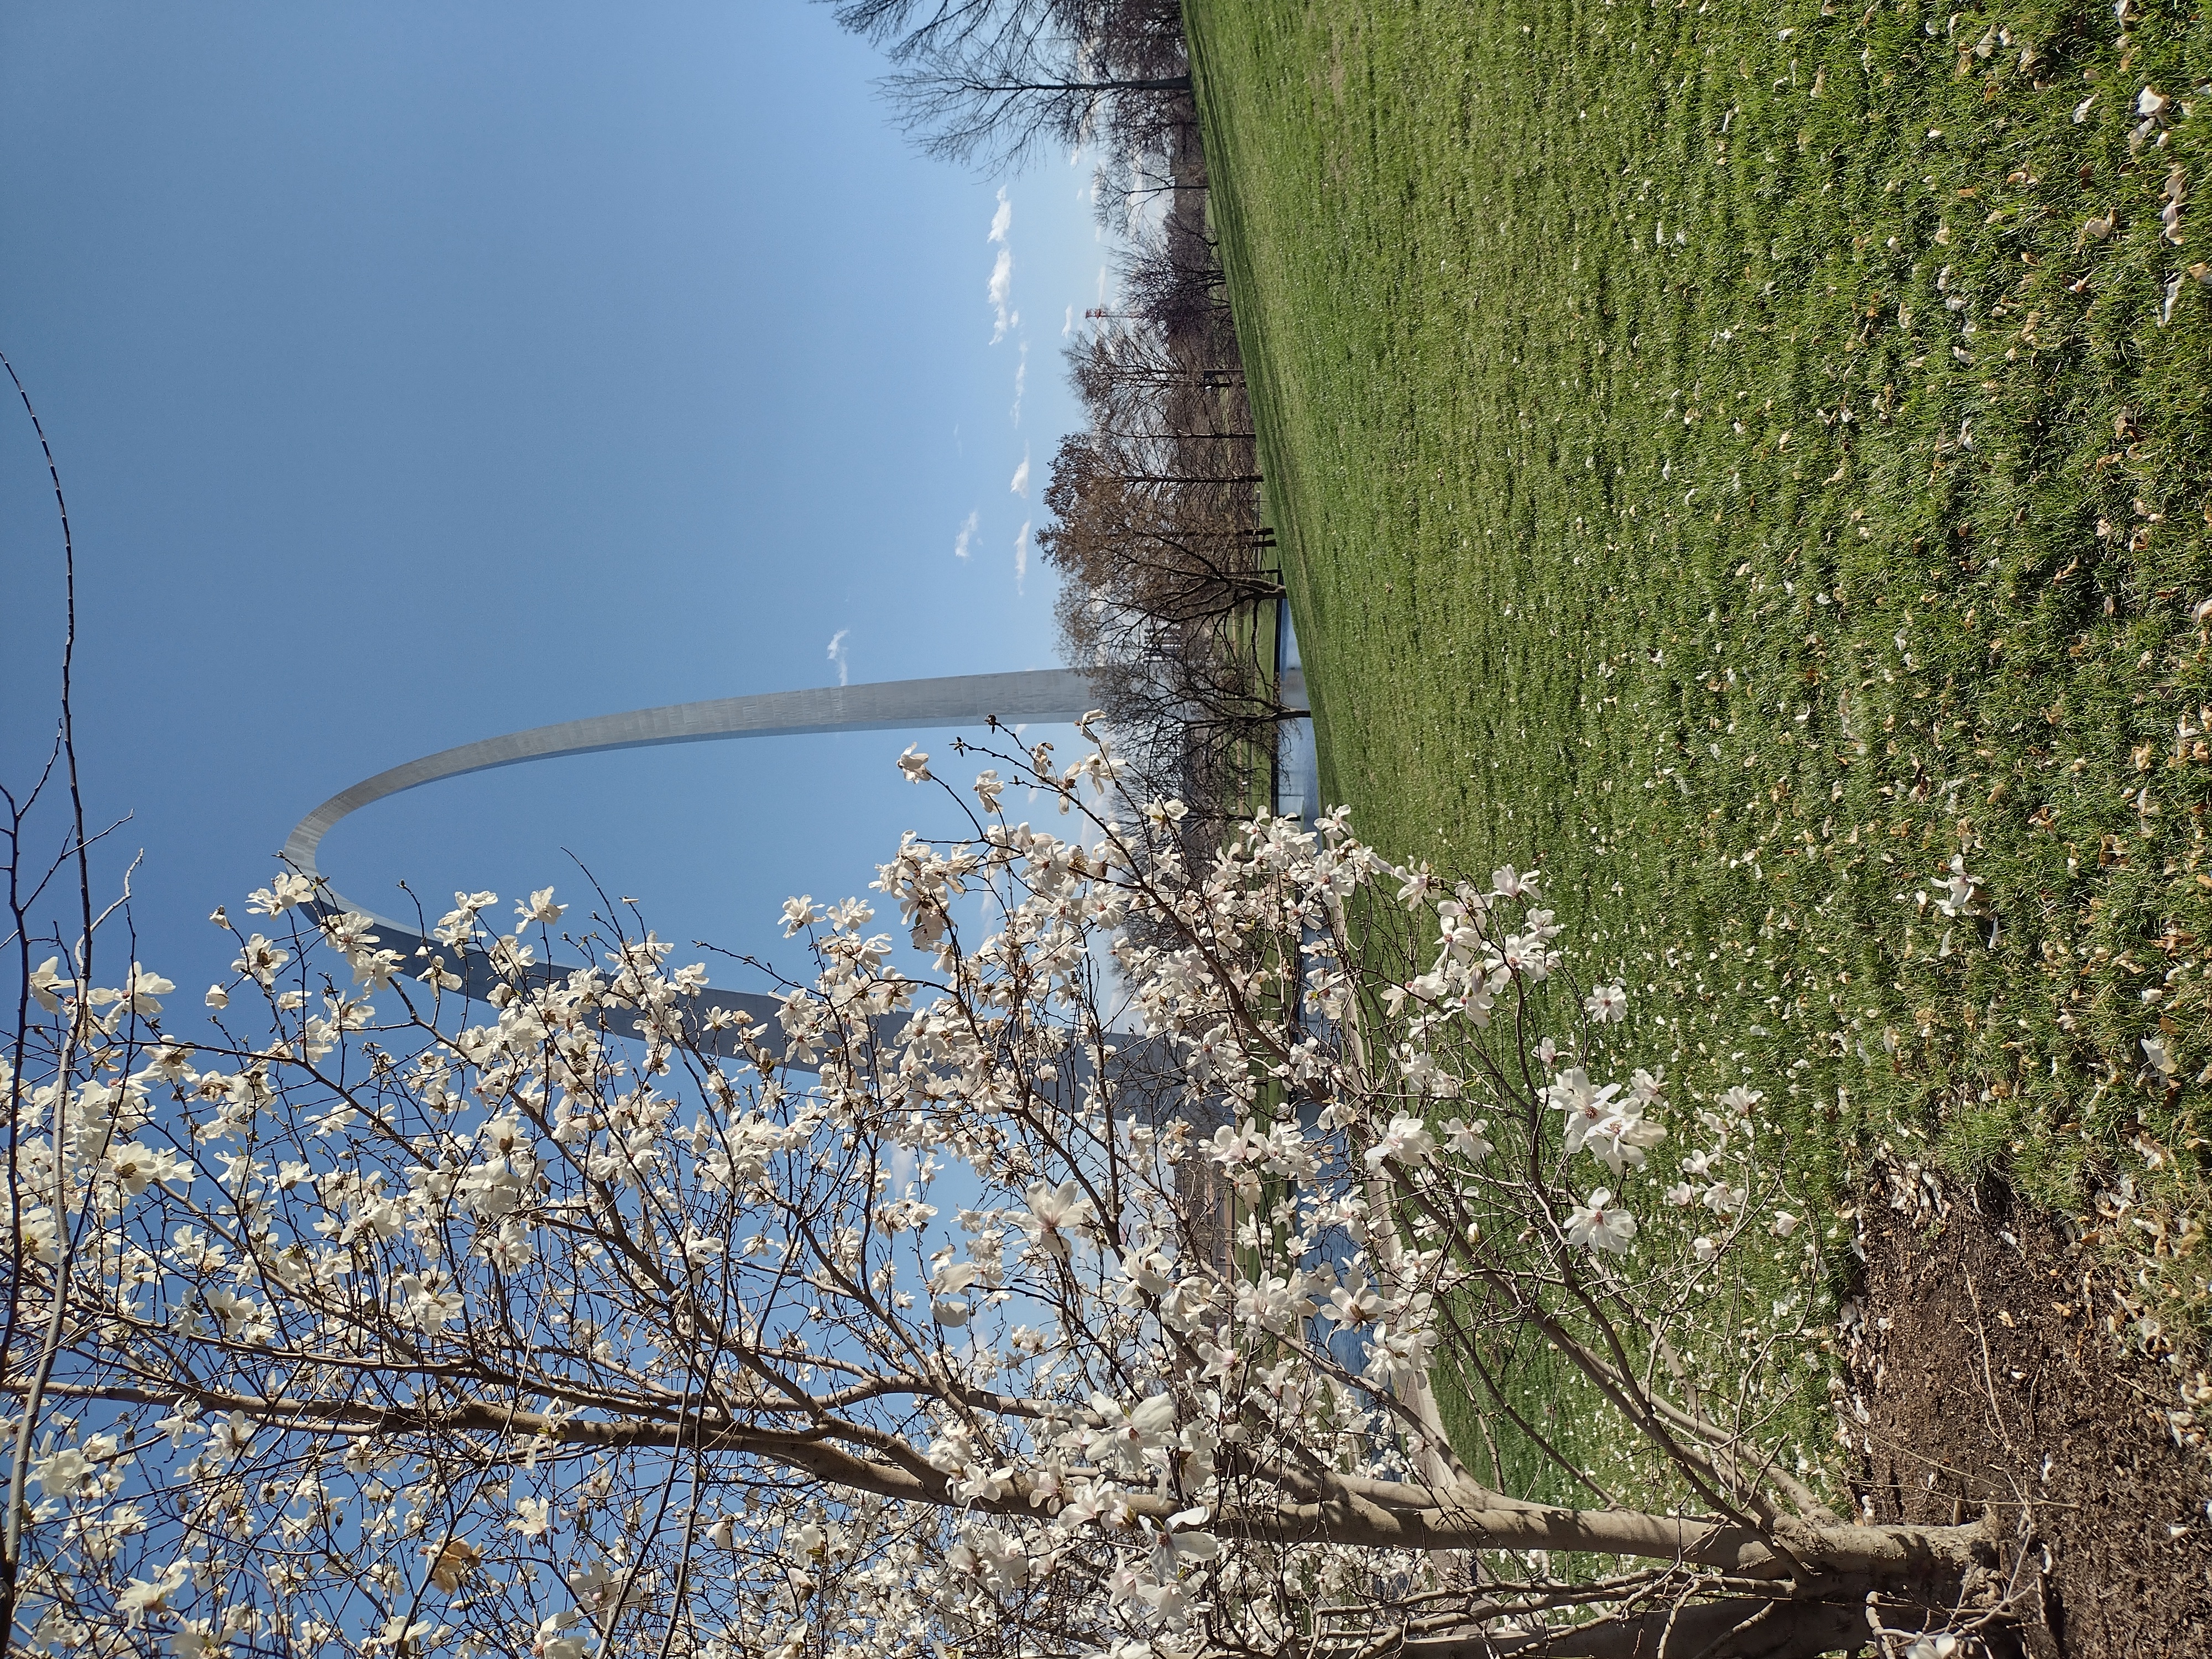 A tree with white blossoms and no leaves. A pond and the Gateway Arch is in the background.